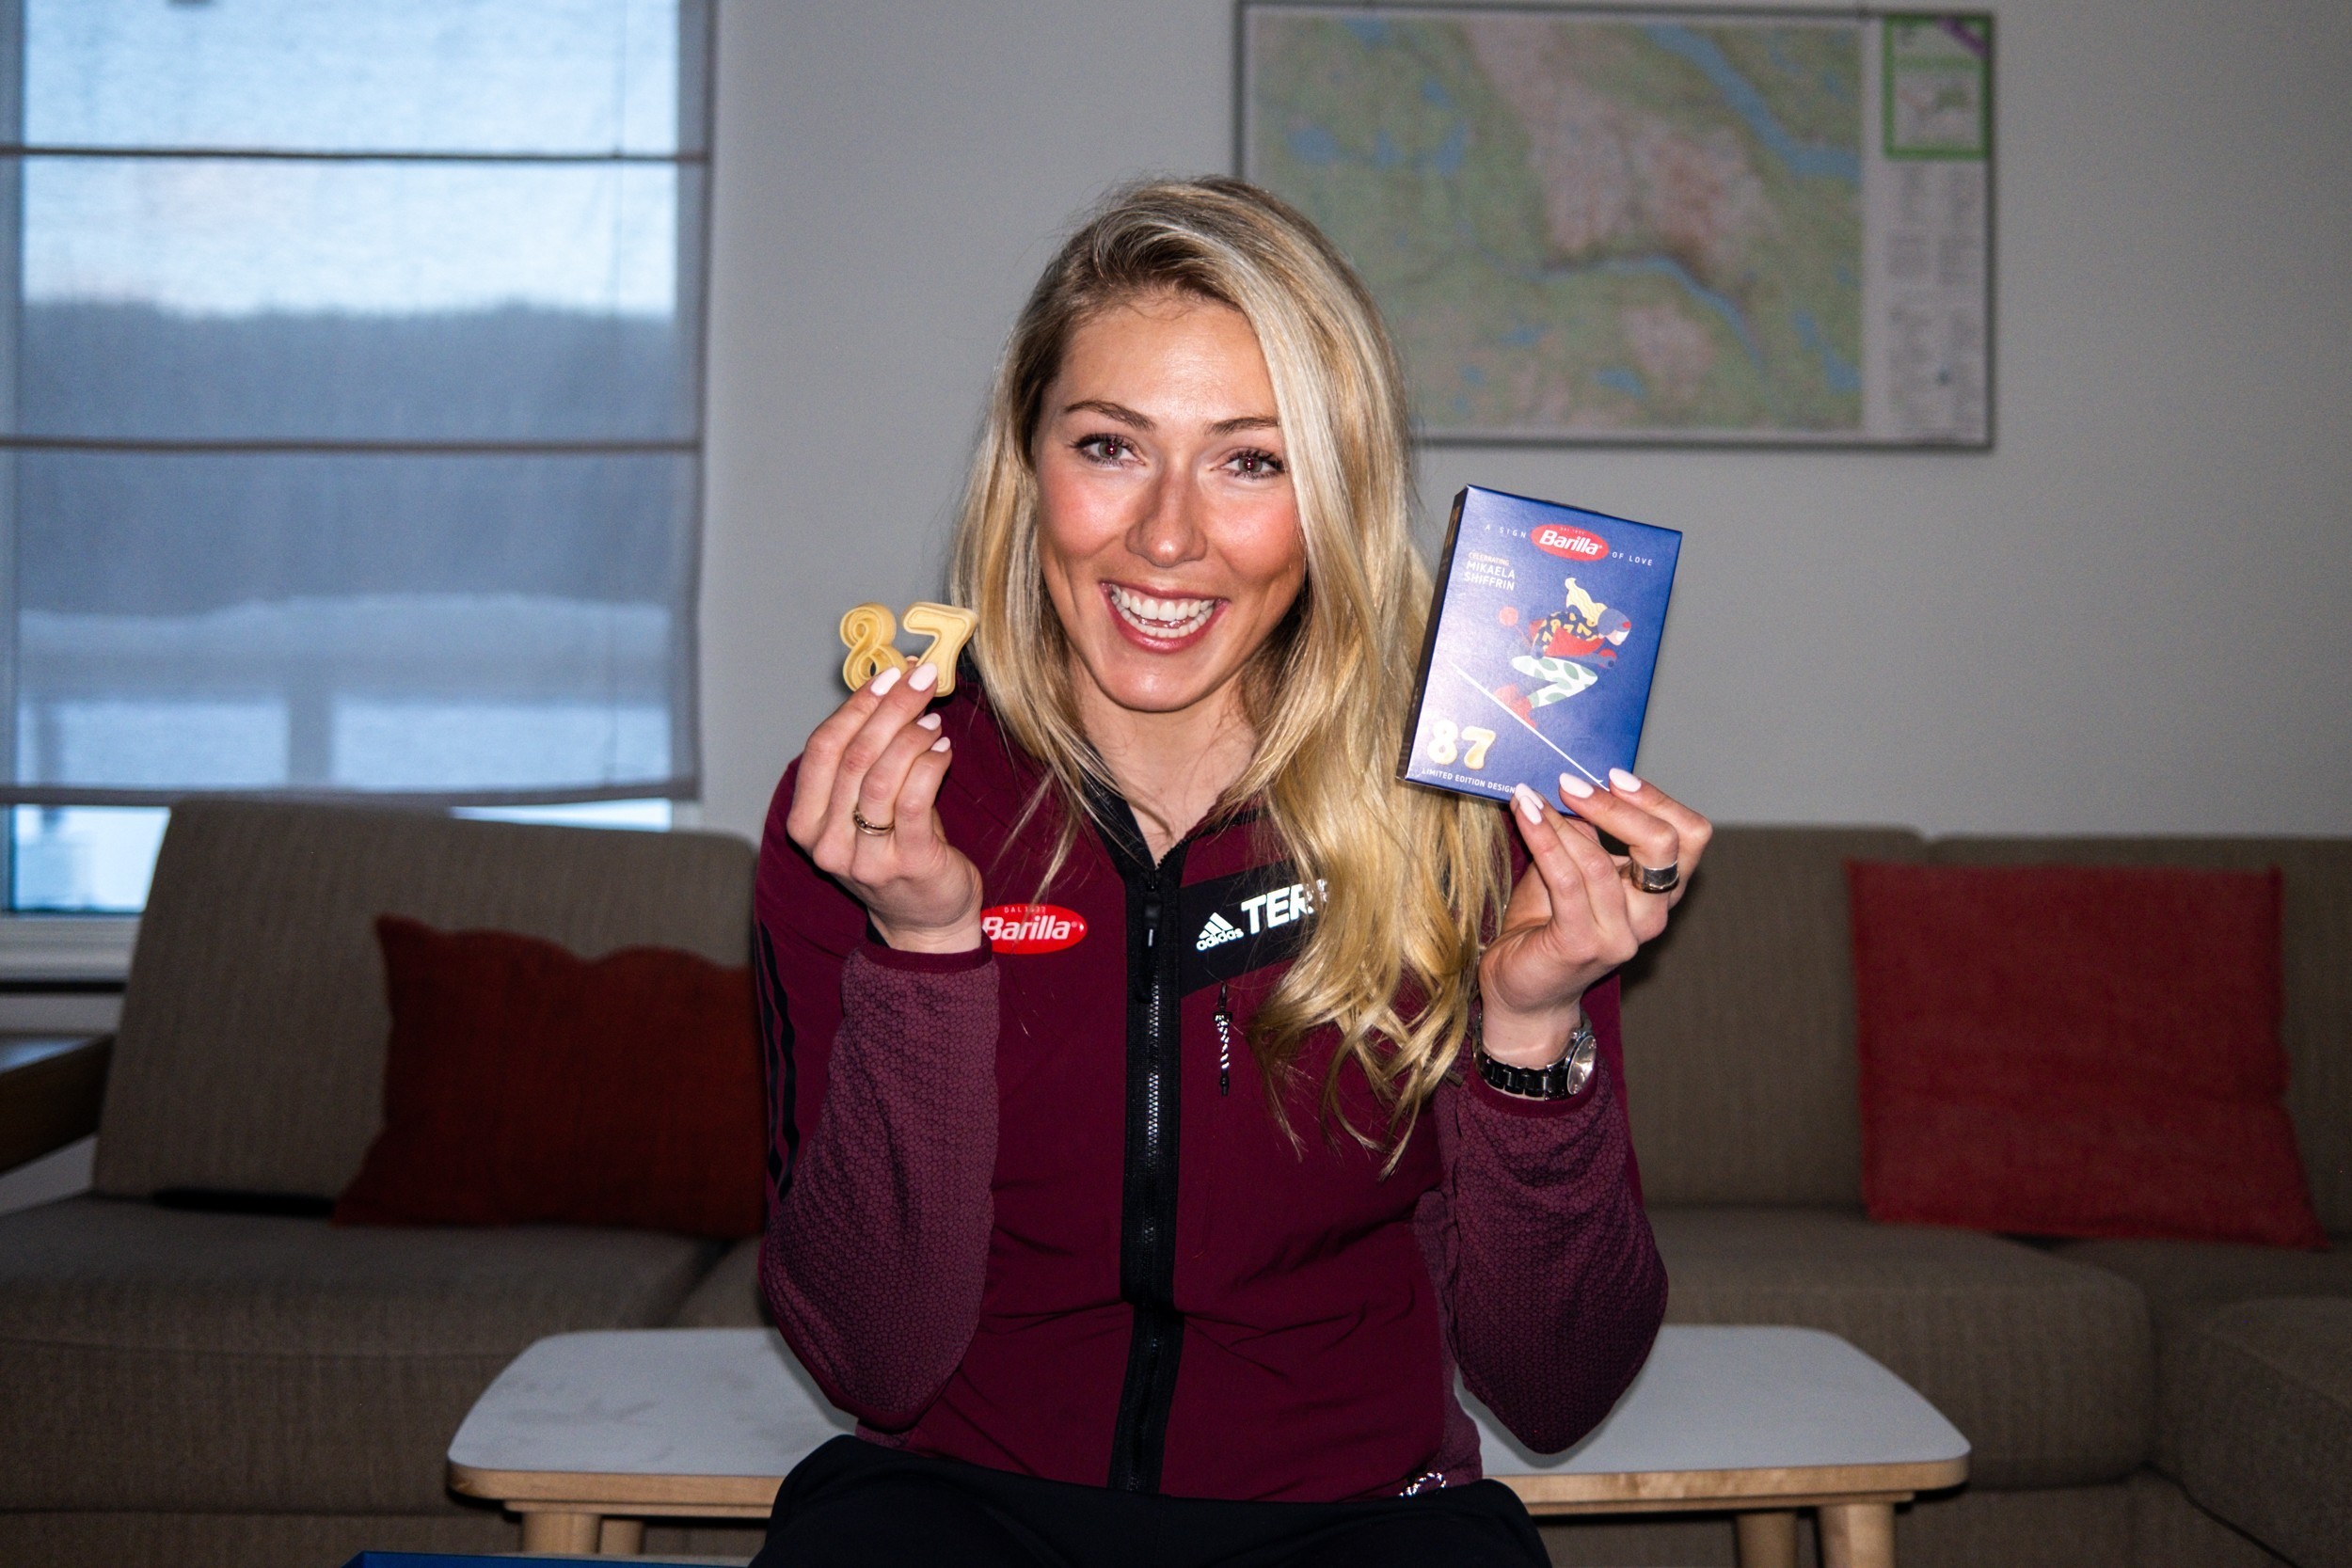 Barilla & Mikaela Shiffrin: Greatness starts with a great recipe - Pack No. 31